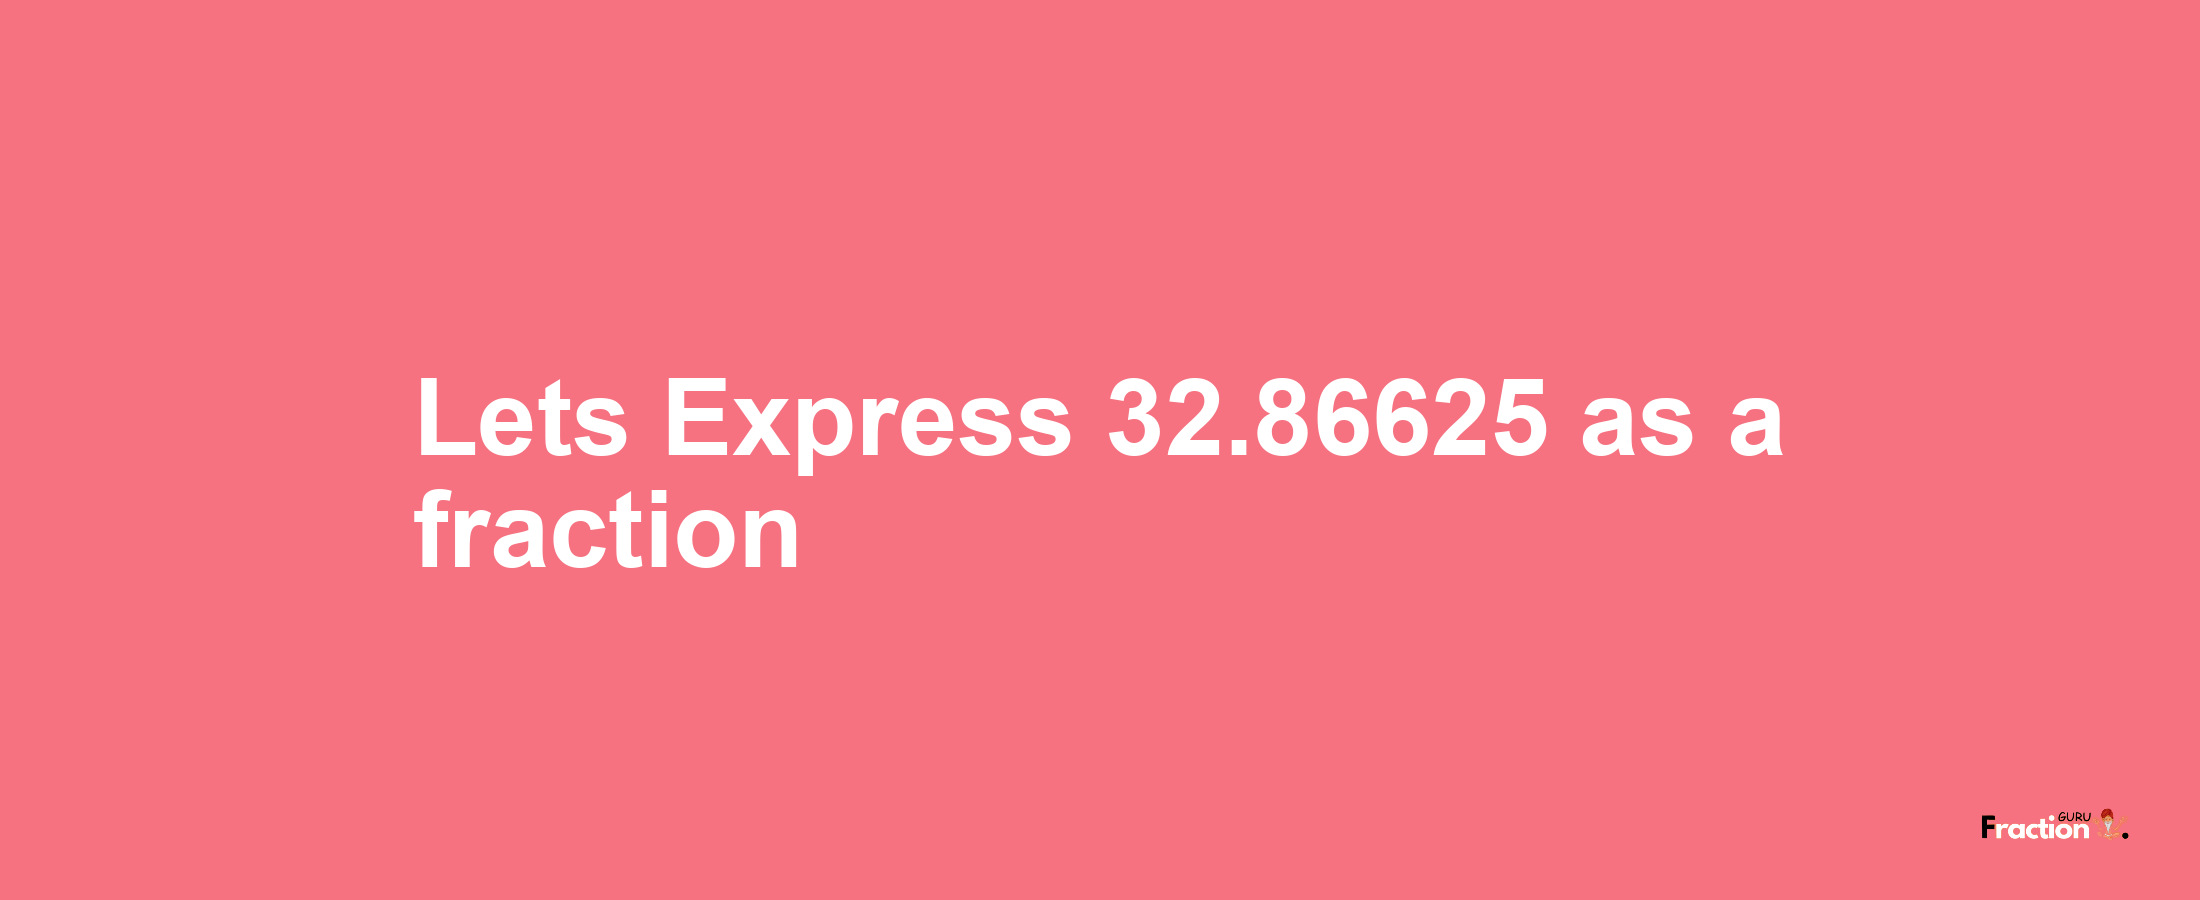 Lets Express 32.86625 as afraction